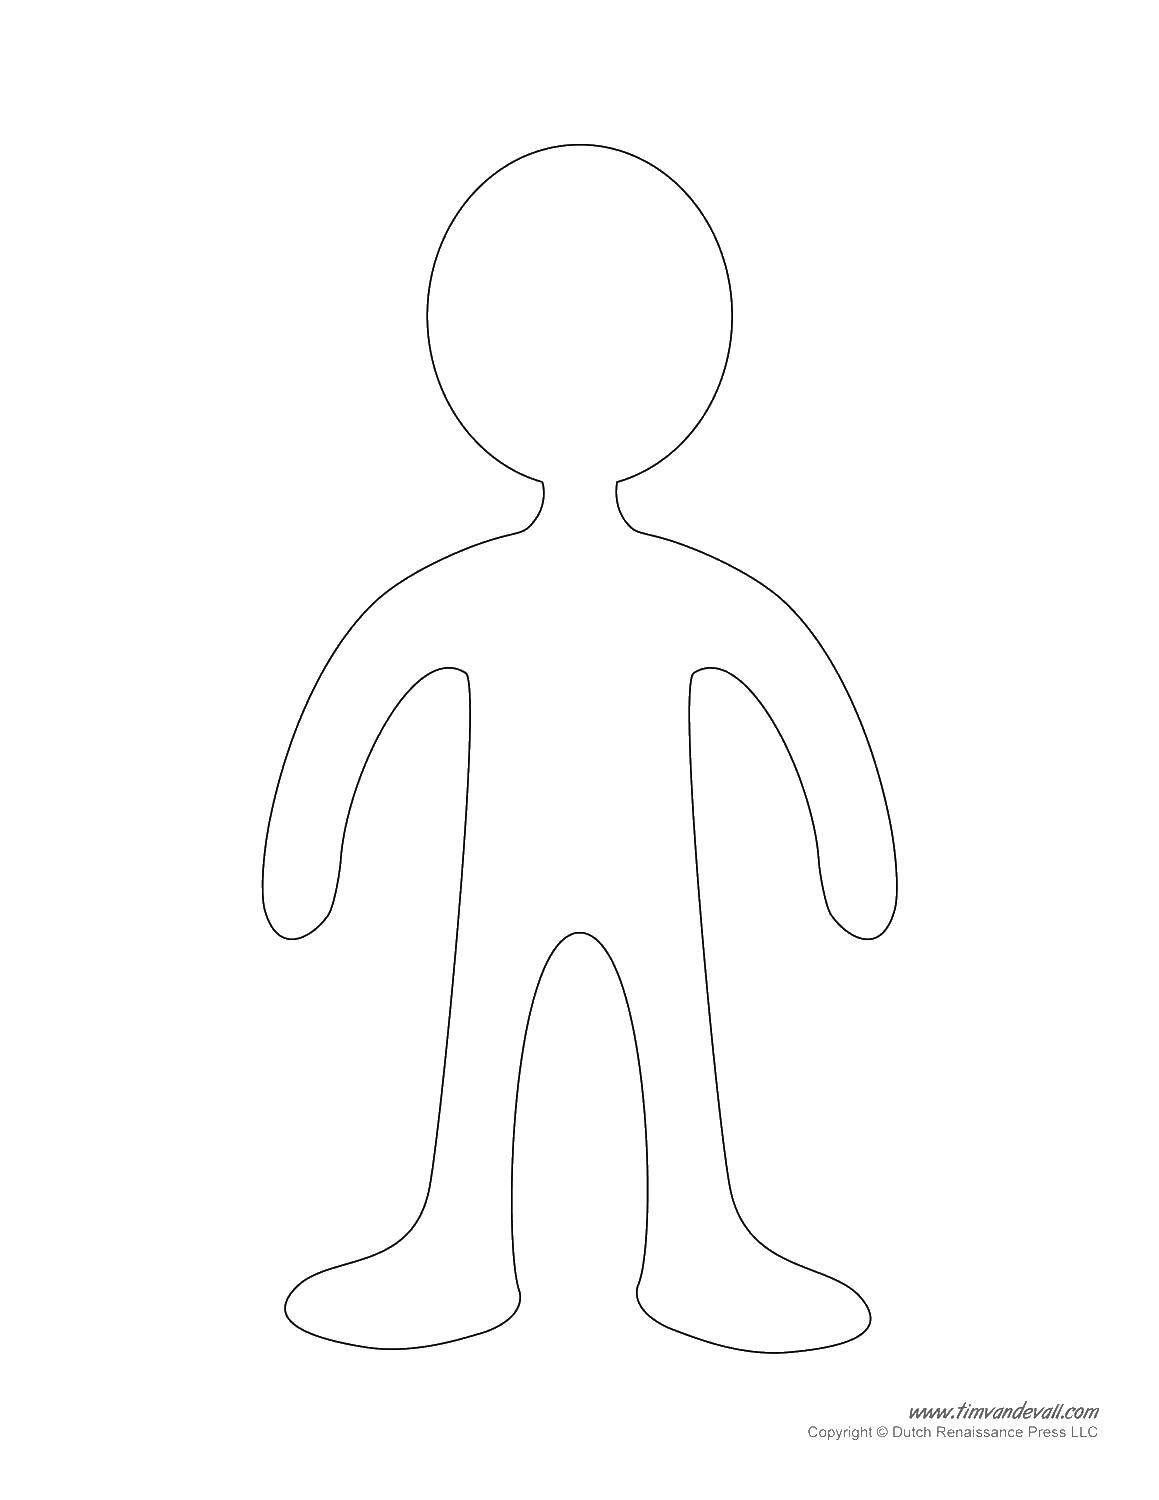 Coloring Circuit man. Category The contour of the doll . Tags:  doll, contours, man.